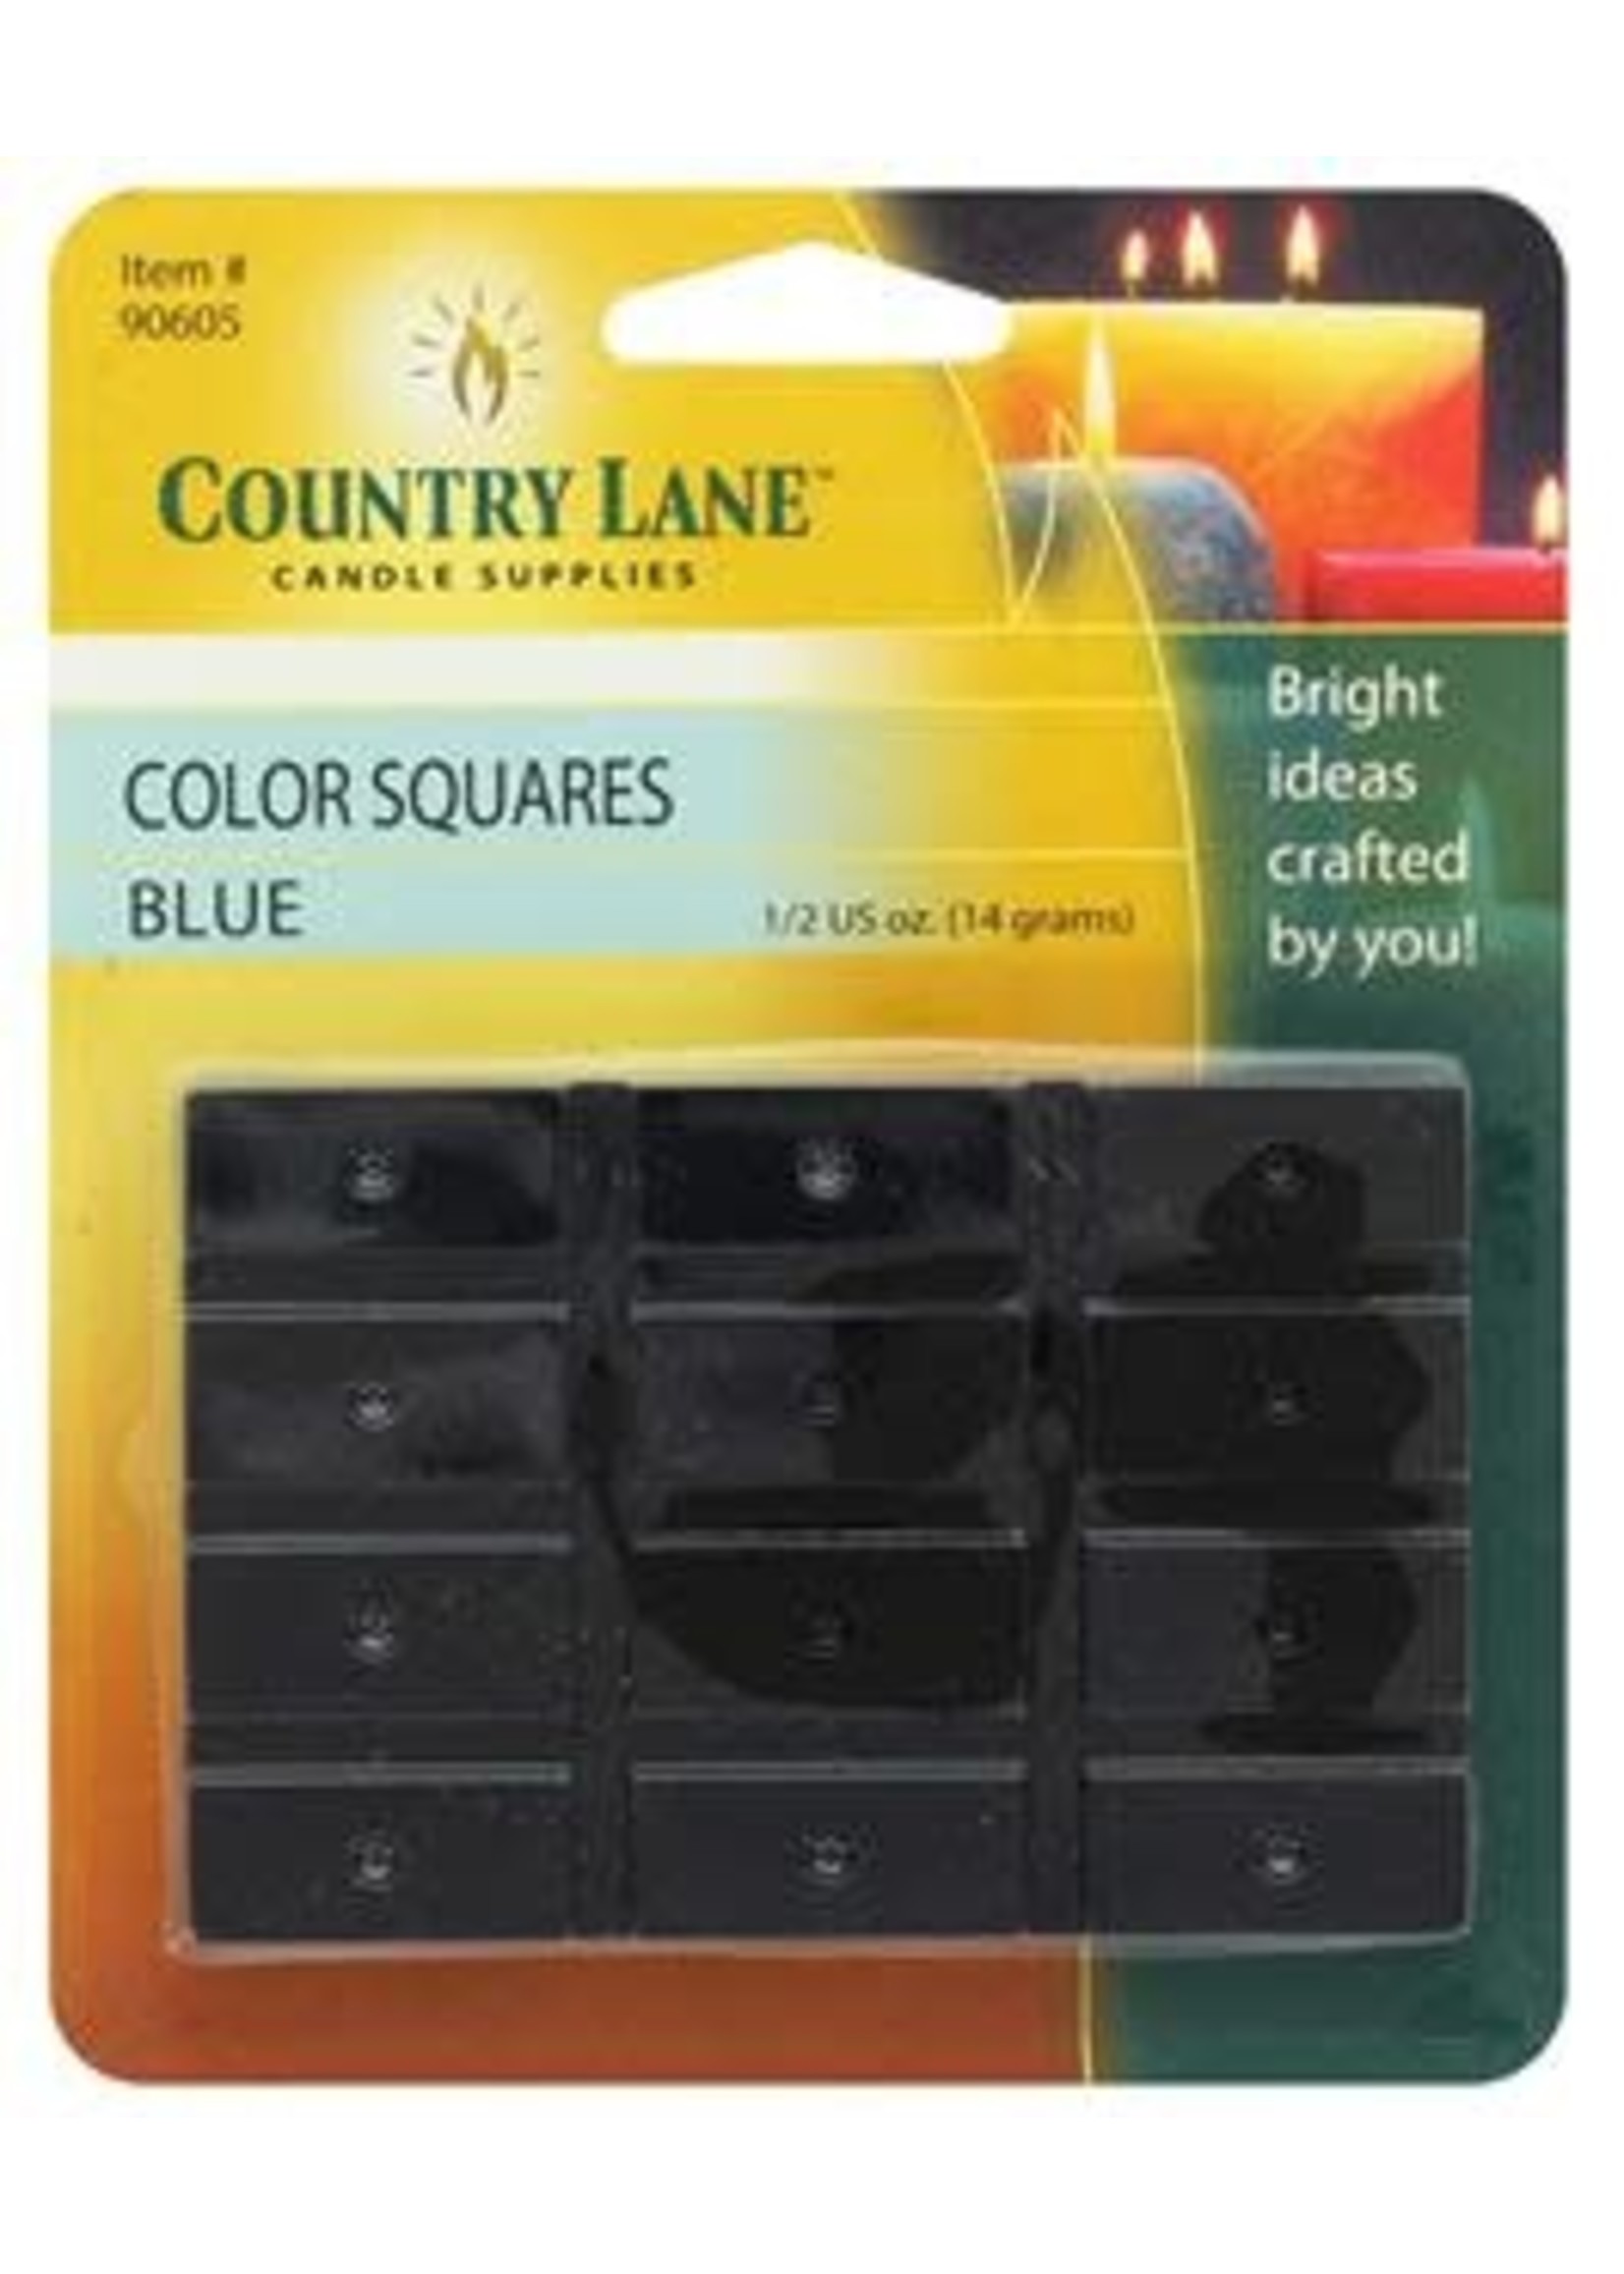 Country Lane Candle Color Squares .5oz Blue